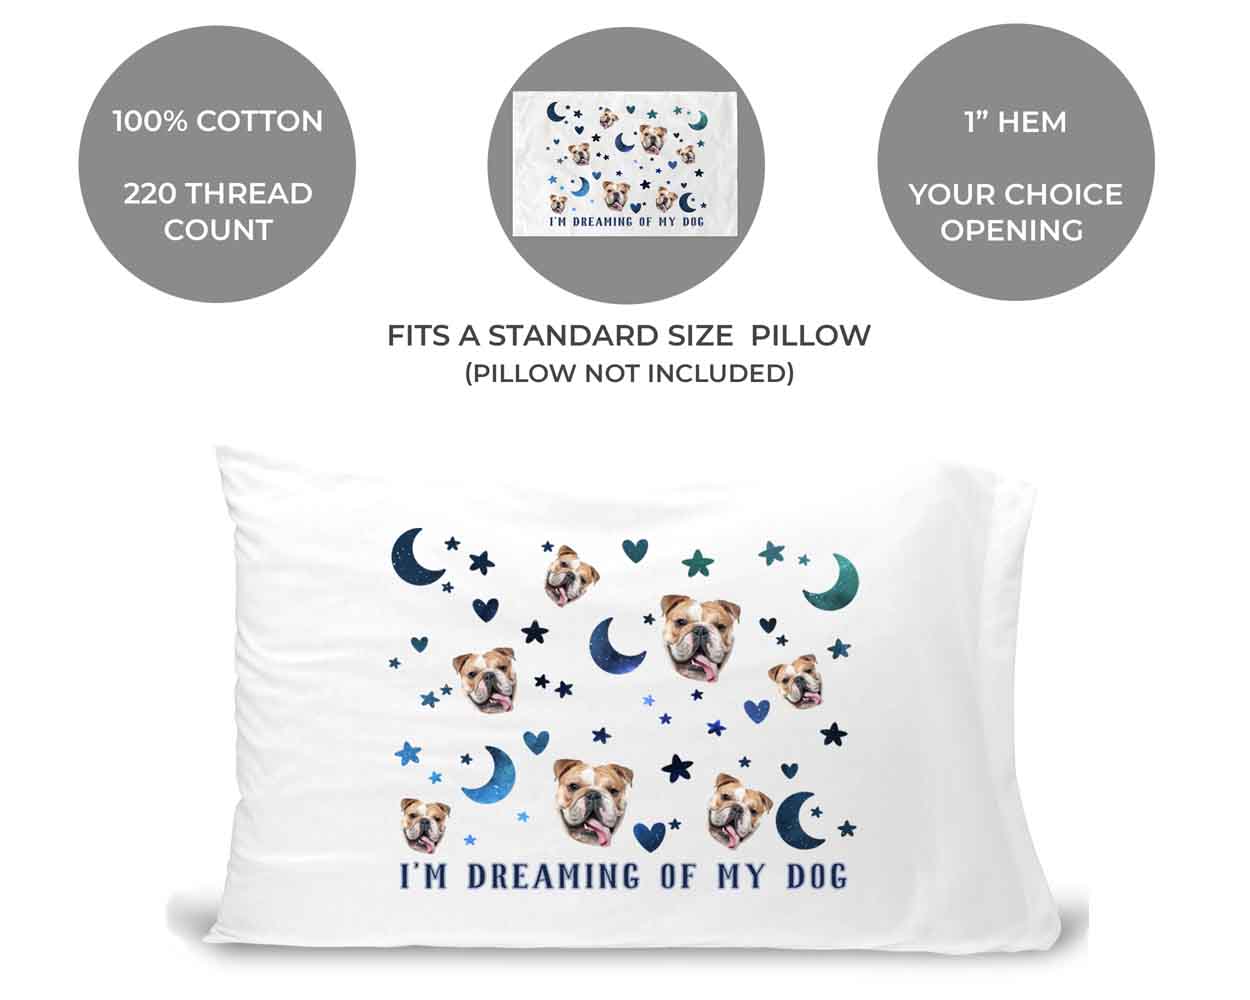 Custom printed pillowcase, fits a standard size pillow, 220 thread count, your choice of opening, your photo face cropped and printed into design makes a unique gift idea.